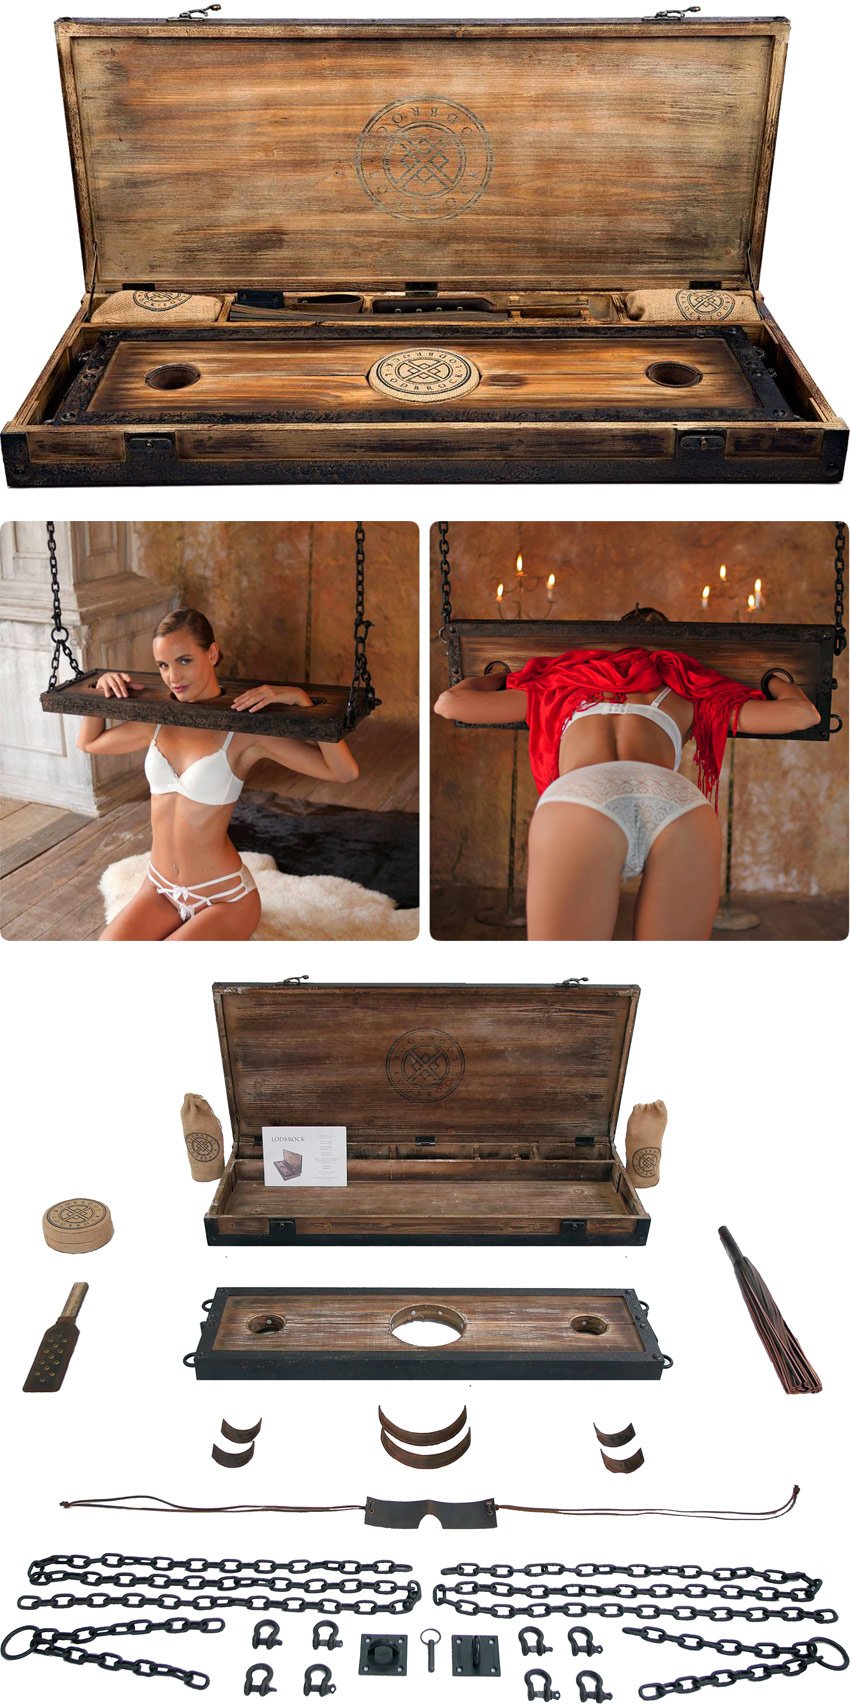 Lodbrock Schlossmeister pillory in wood and metal (+ accessories)